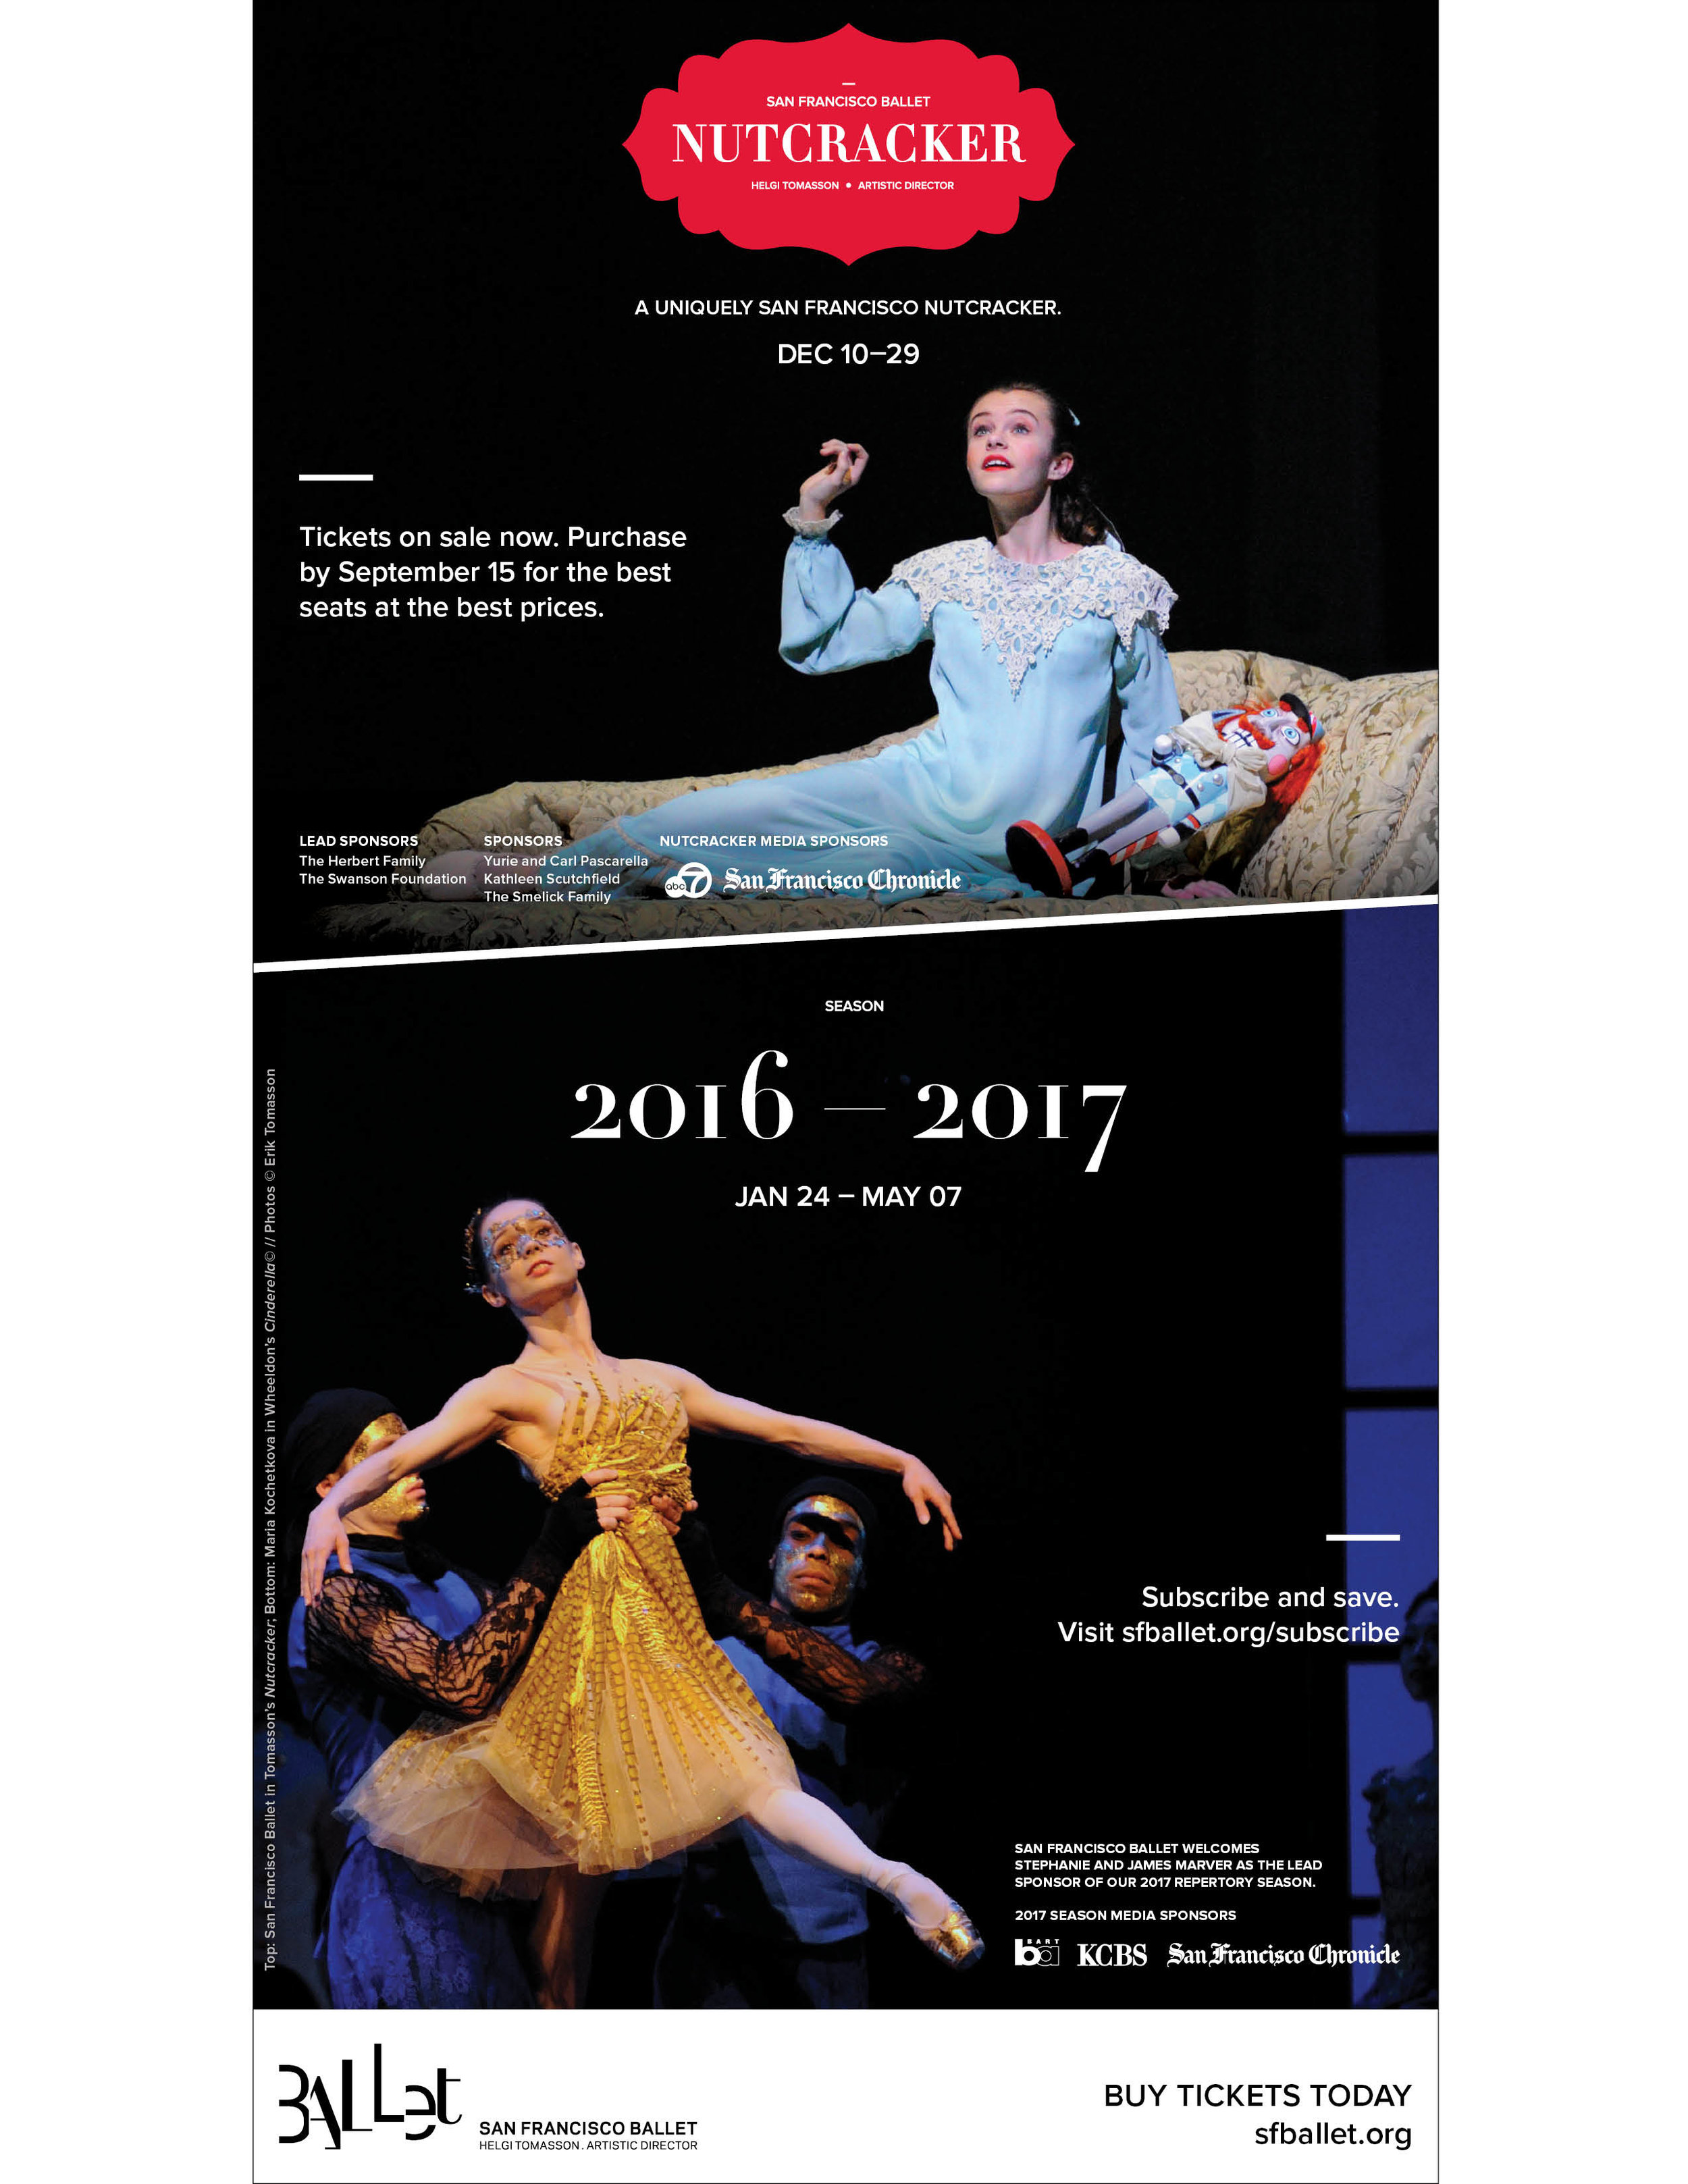  COMPANY: San Francisco Ballet  PROJECT: Print ad, appeared in NYT, SF Chronicle, SF Examiner, etc.&nbsp;  MY ROLE: Designed layout according to brand guidelines along with the marketing department. 